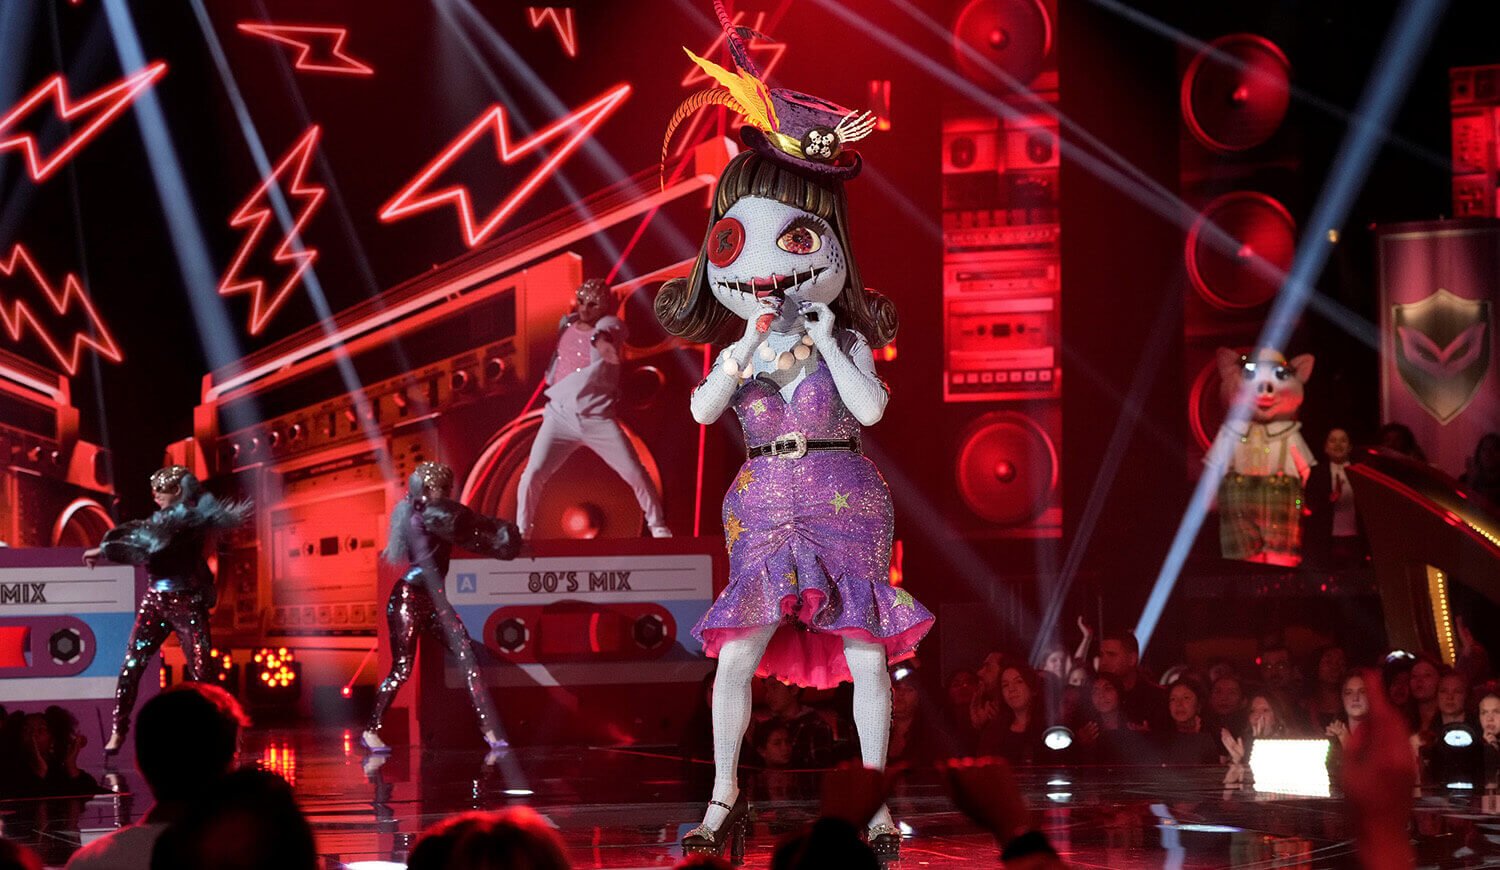 Doll, whom many fans believe is Dee Snider, performs on The Masked Singer Season 9